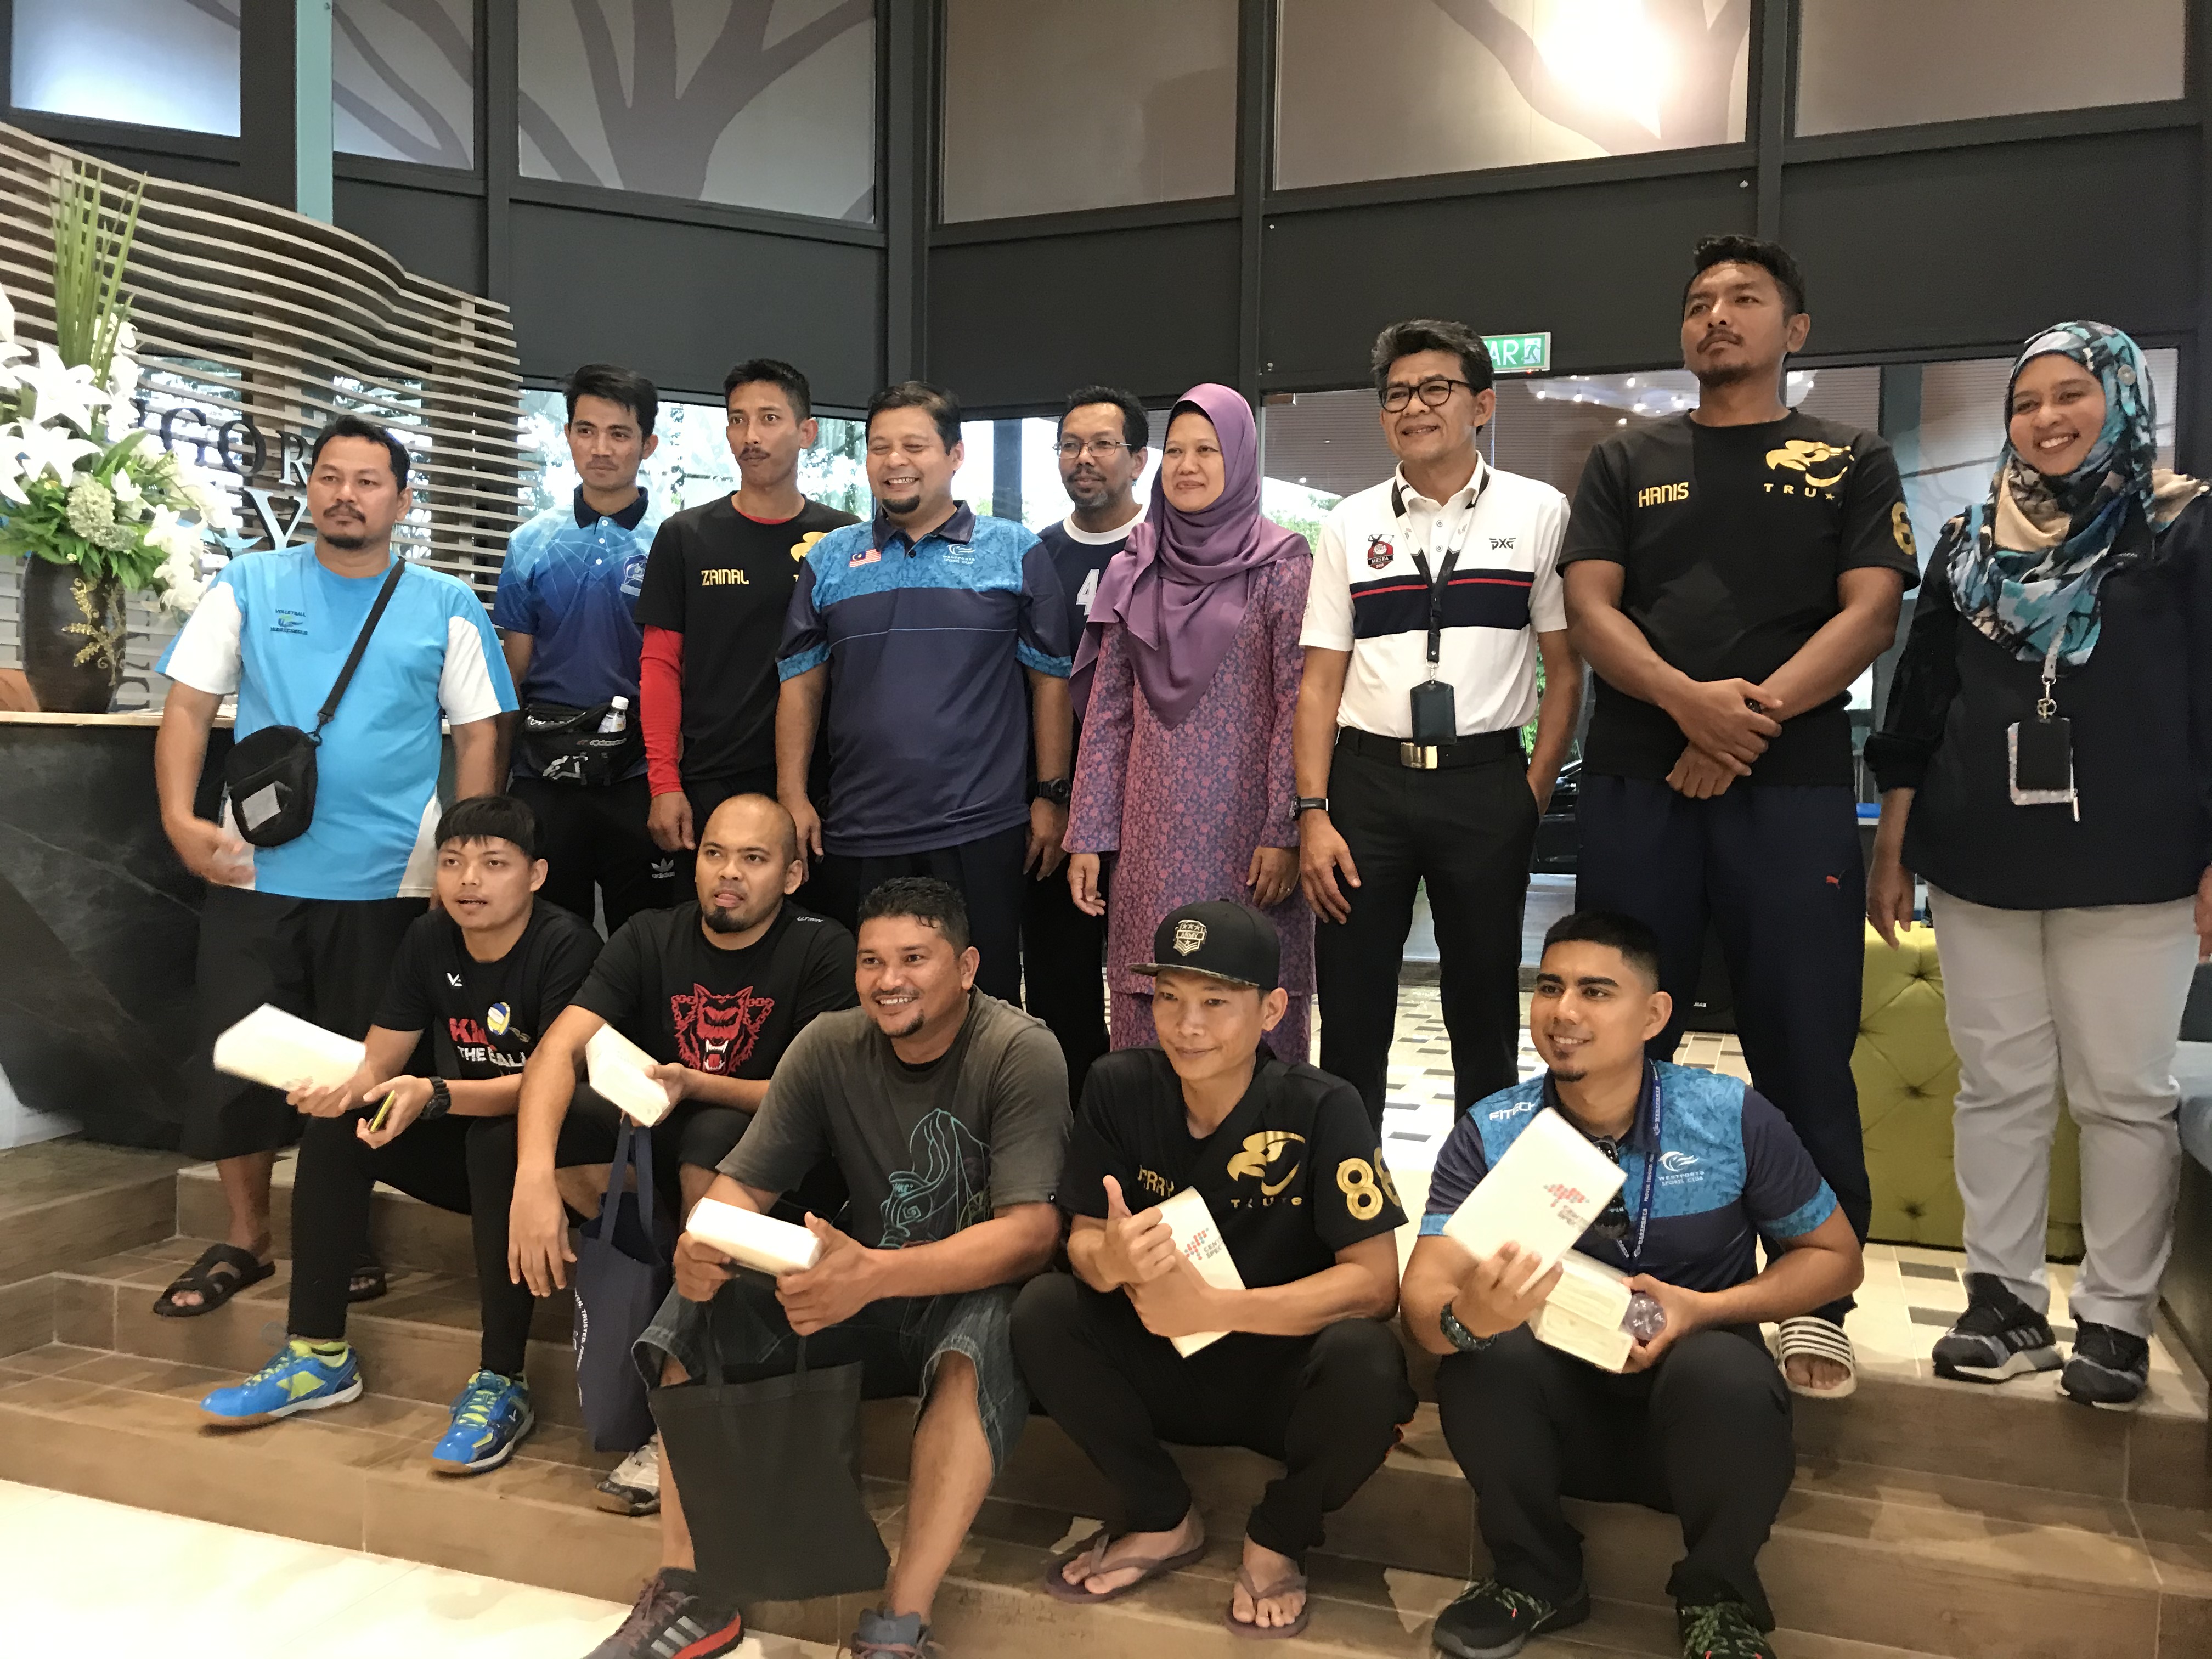 Friendly joust for camaraderie - Central Spectrum (M) Sdn Bhd